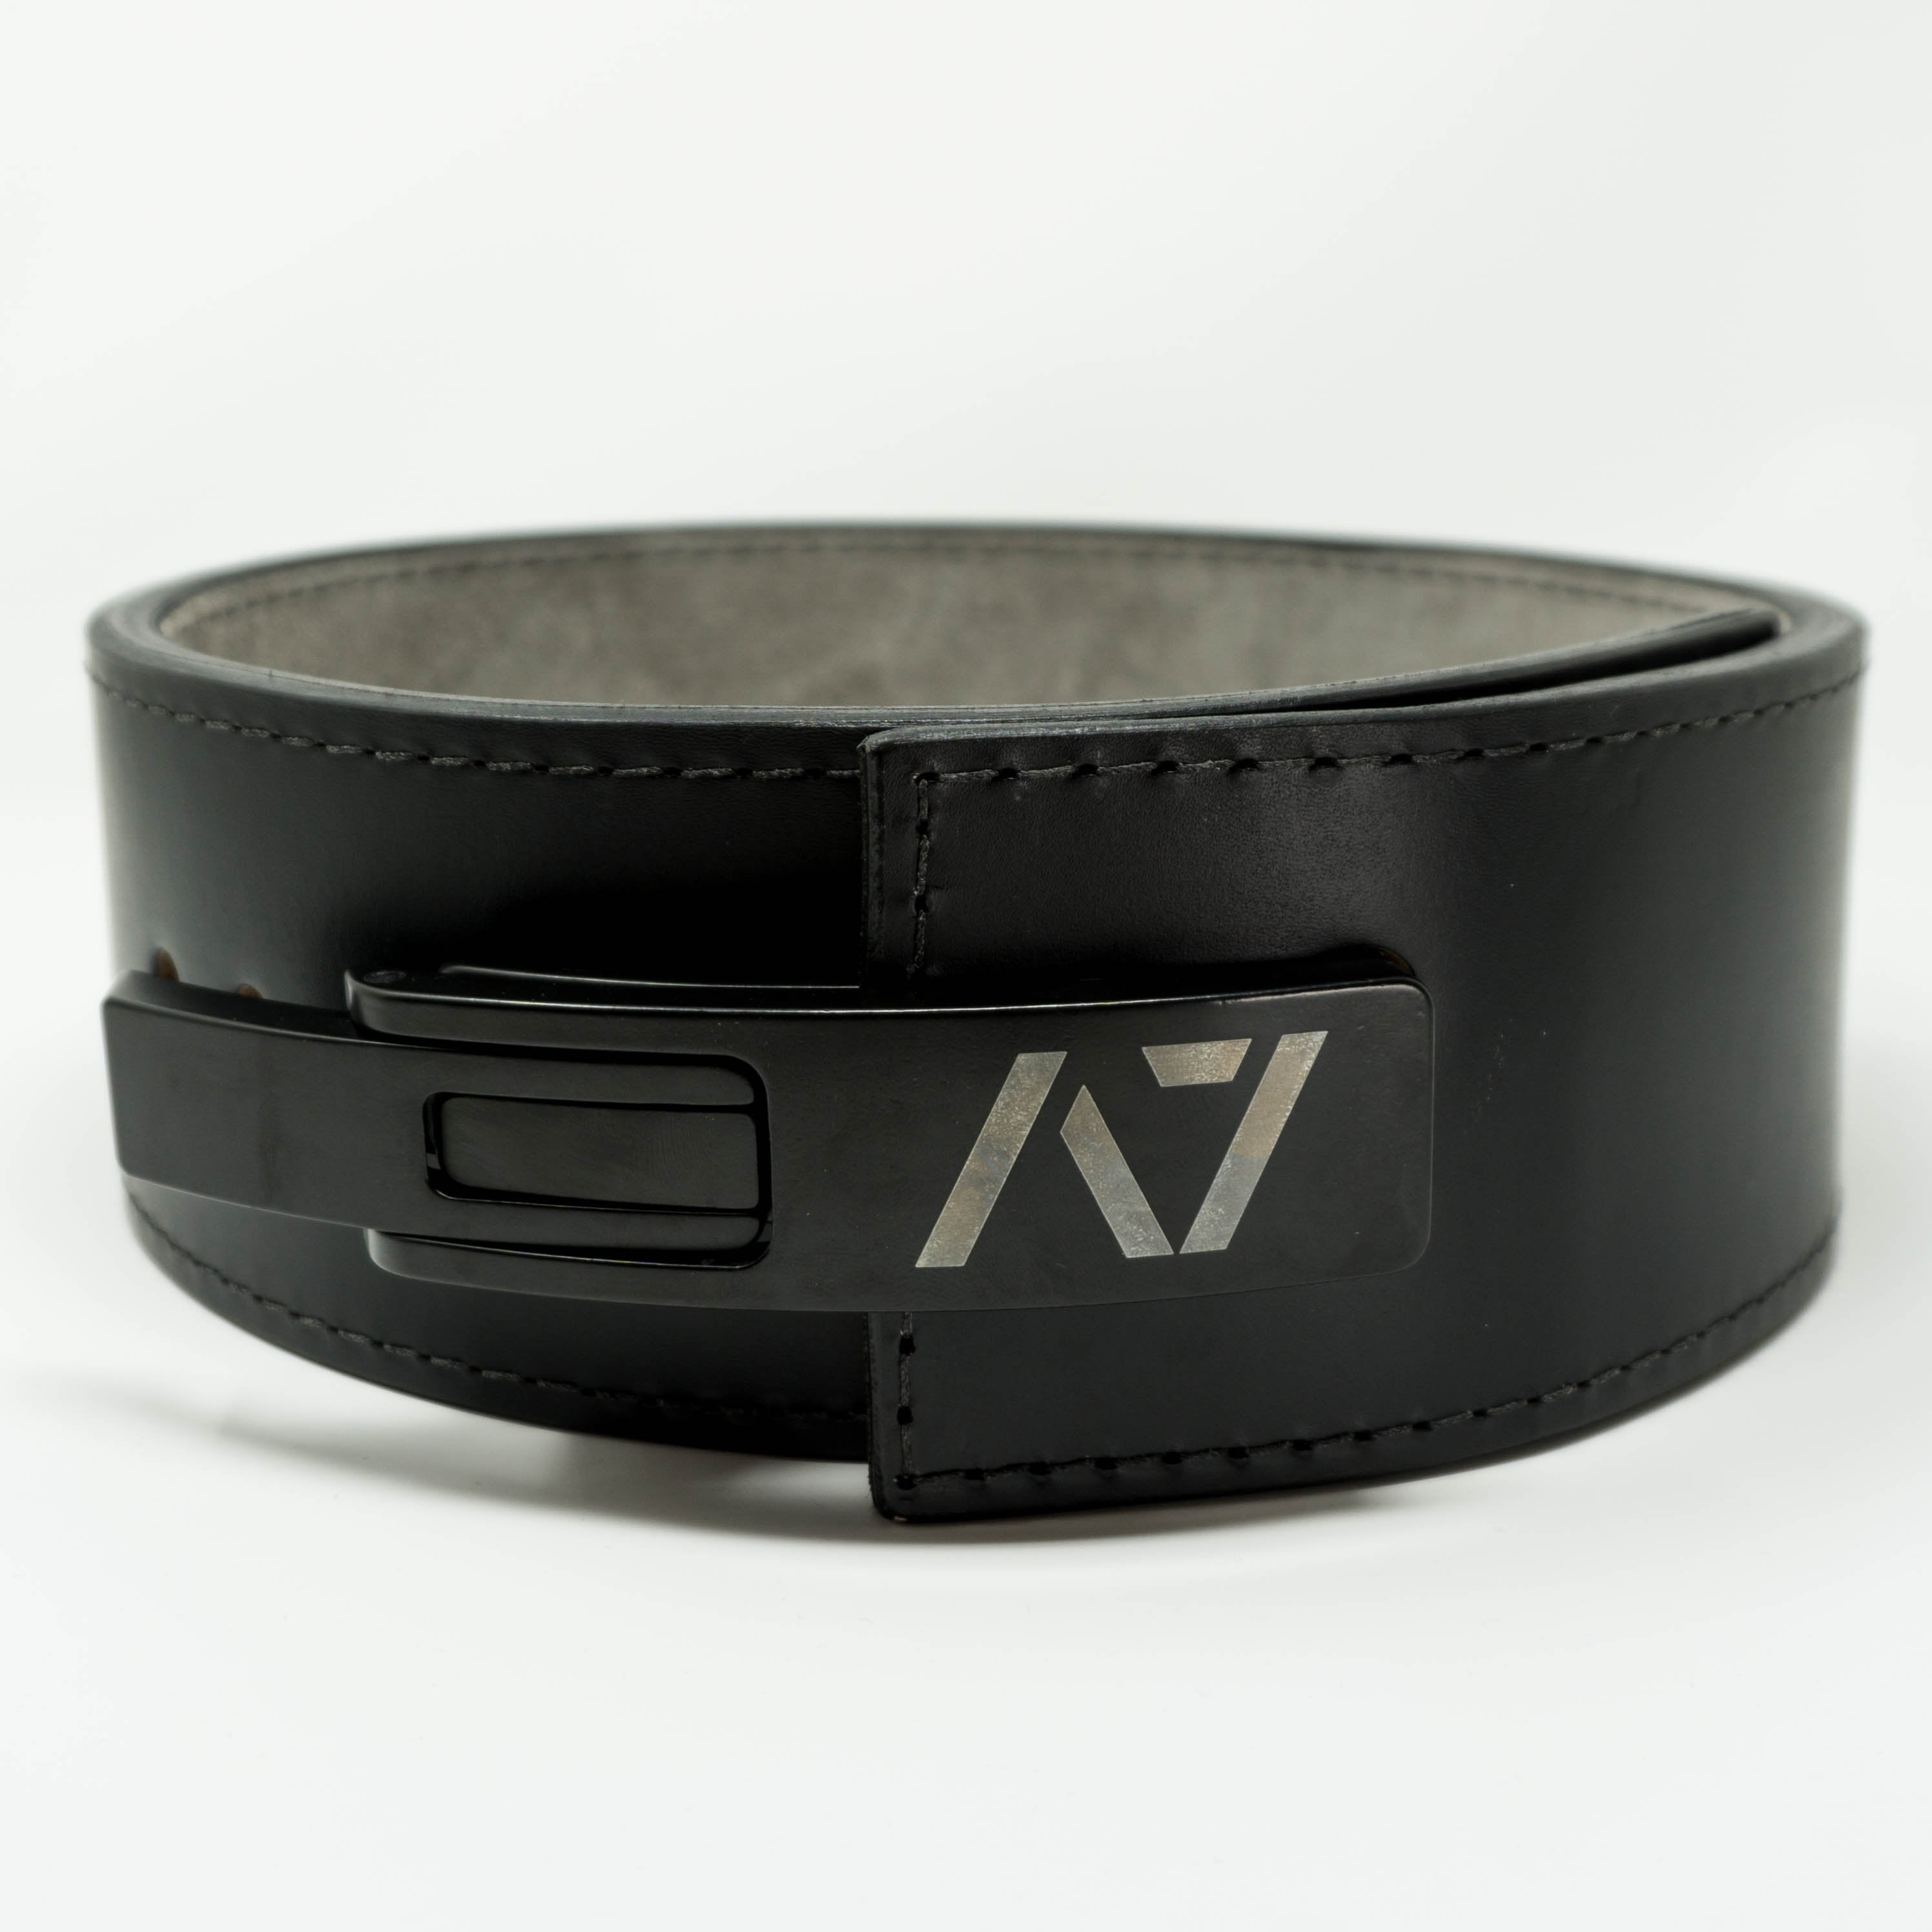 The A7 Lever belt is IPF Approved and is great for powerlifting and strongman. Purchase this powerlifting belts from A7 Europe. Purchase Powerlifting Belts from A7 Europe for shipping to Europe. Best Weightlifting belts shipping to UK and Europe from A7 Europe. Pioneer lever weightlifting belt. The best Powerlifting apparel for all your workouts. This A7 Pioneer Cut Prong belt is the perfect piece of equipment to finish off your IPF Approved Kit. 